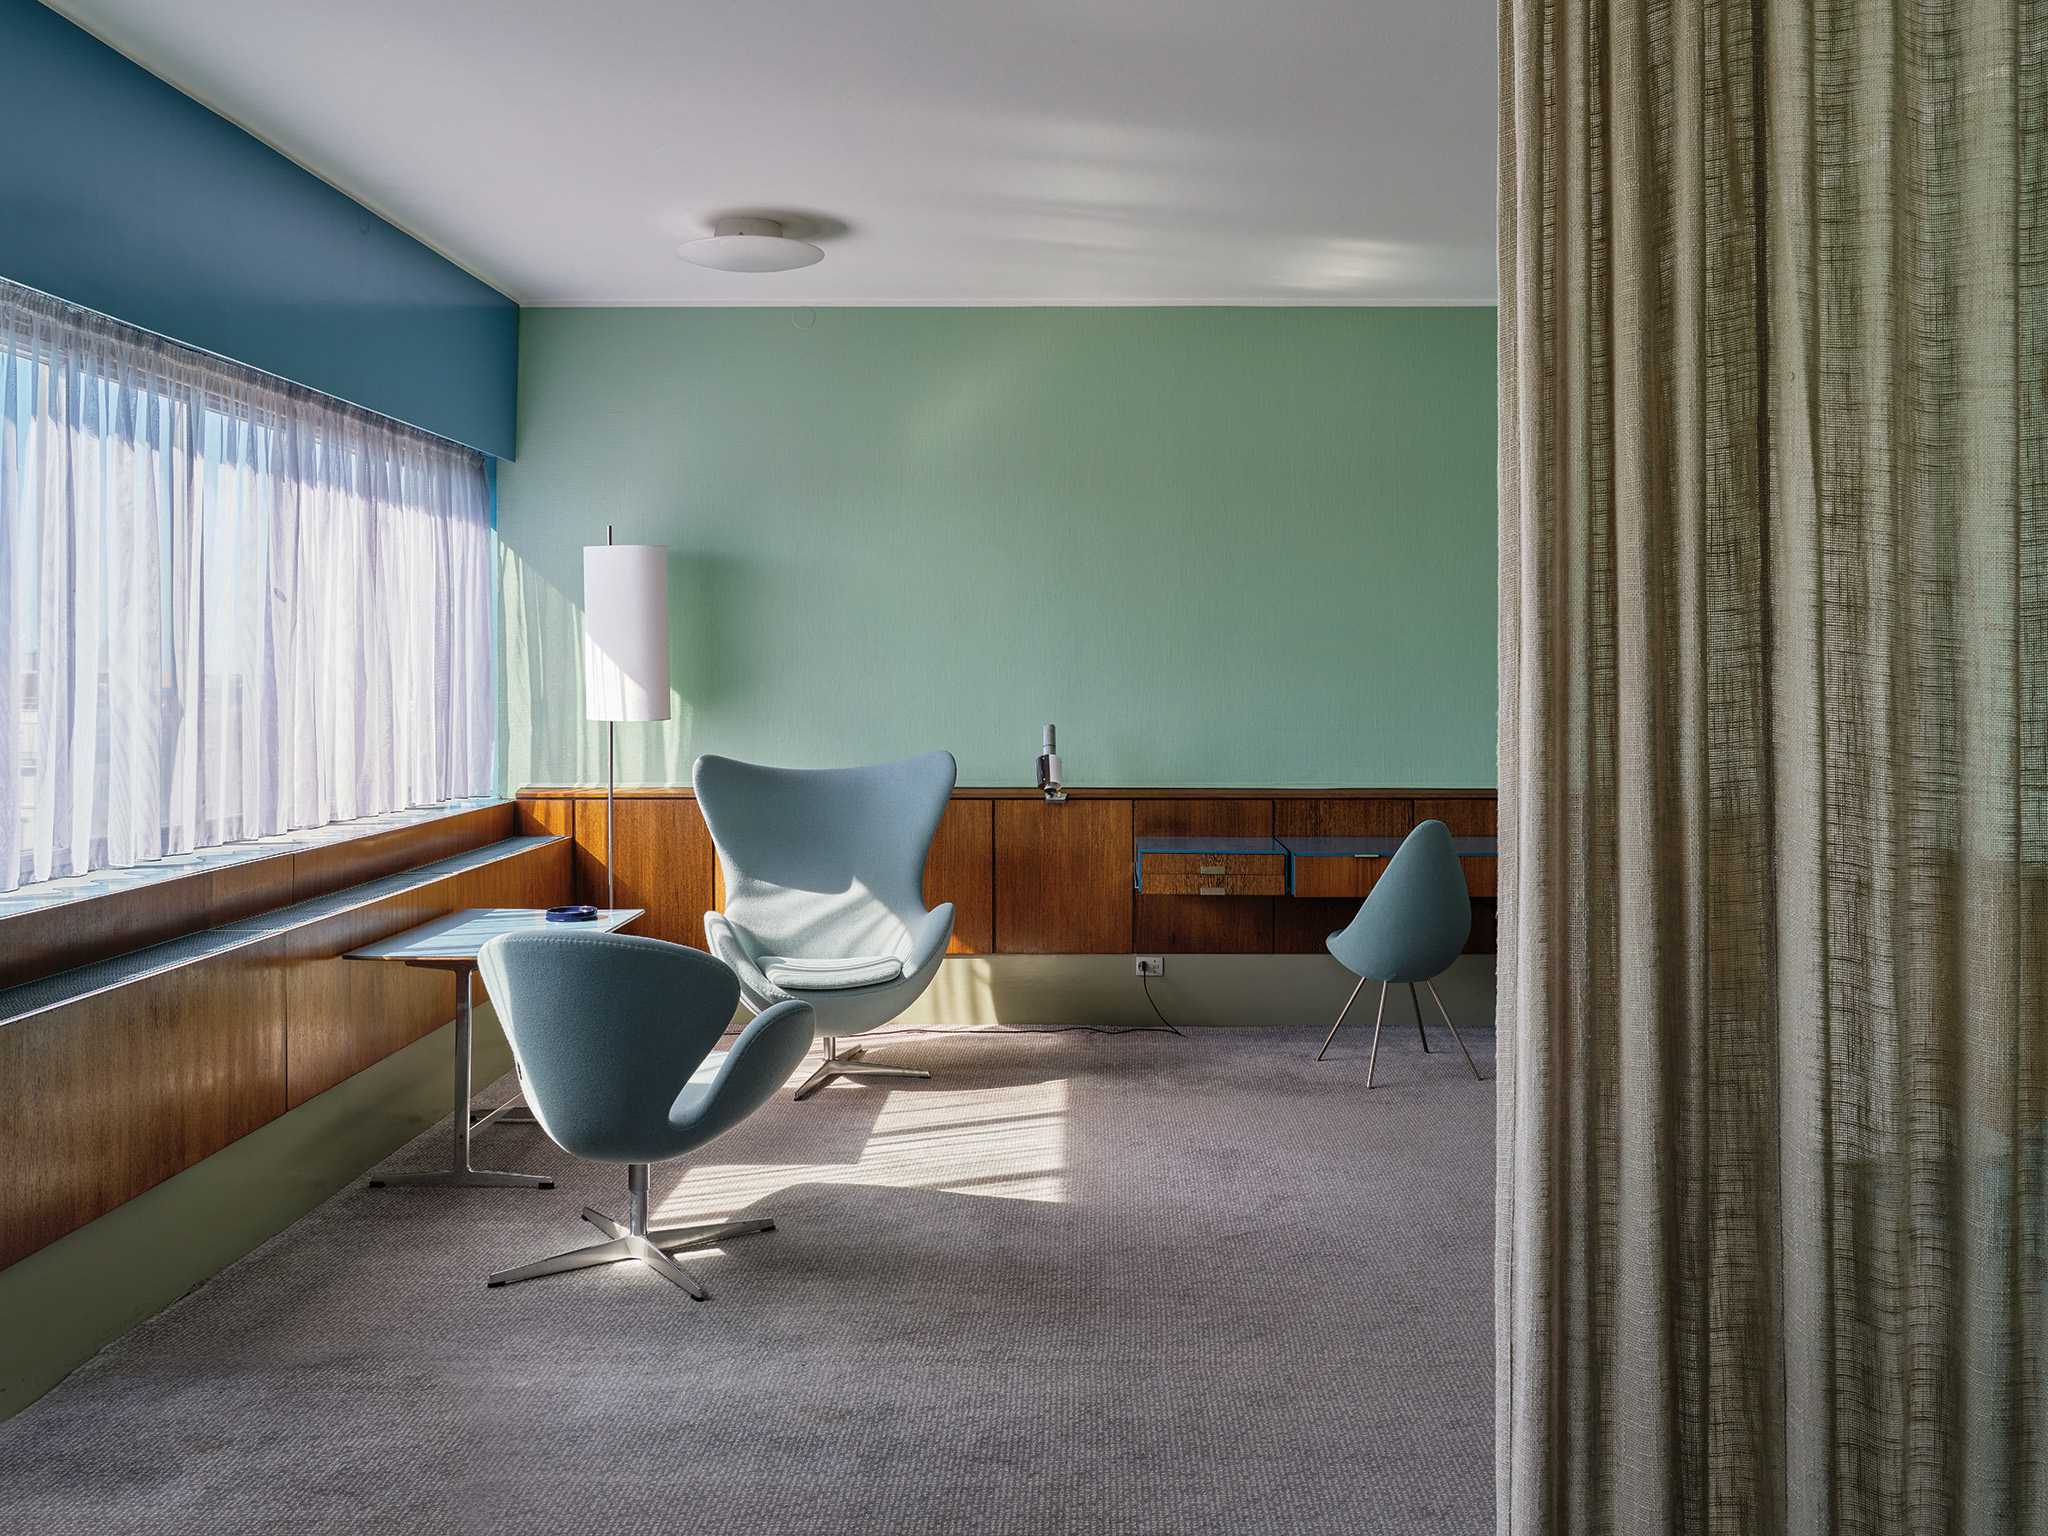 Room 606: The SAS House and the work of Arne Jacobsen